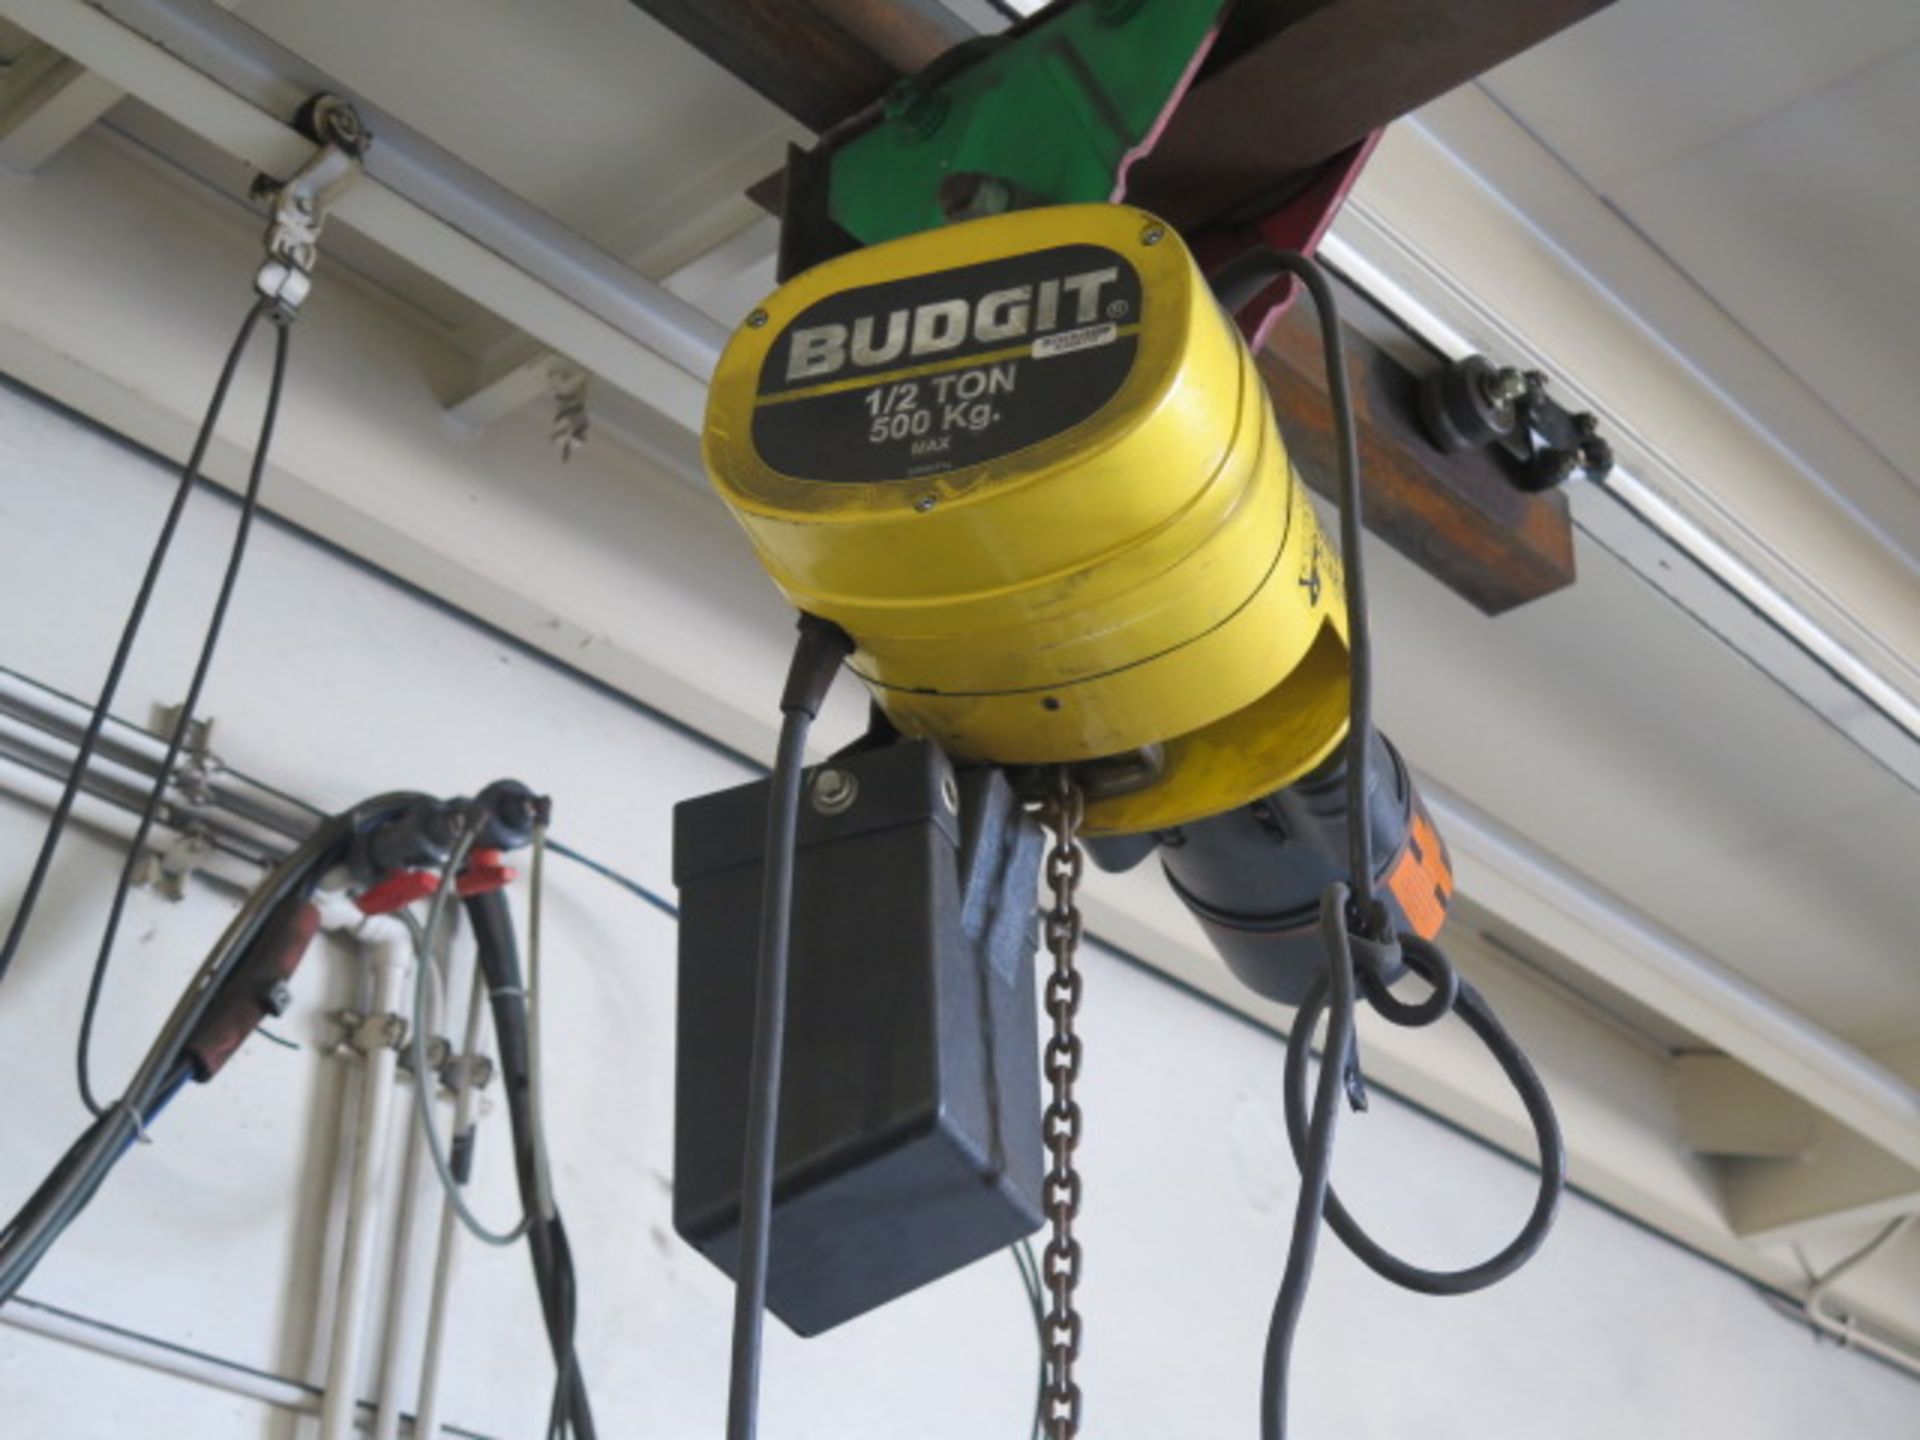 Budget ½ Ton Electric Hoist (HOIST ONLY) (SOLD AS-IS - NO WARRANTY) - Image 2 of 5